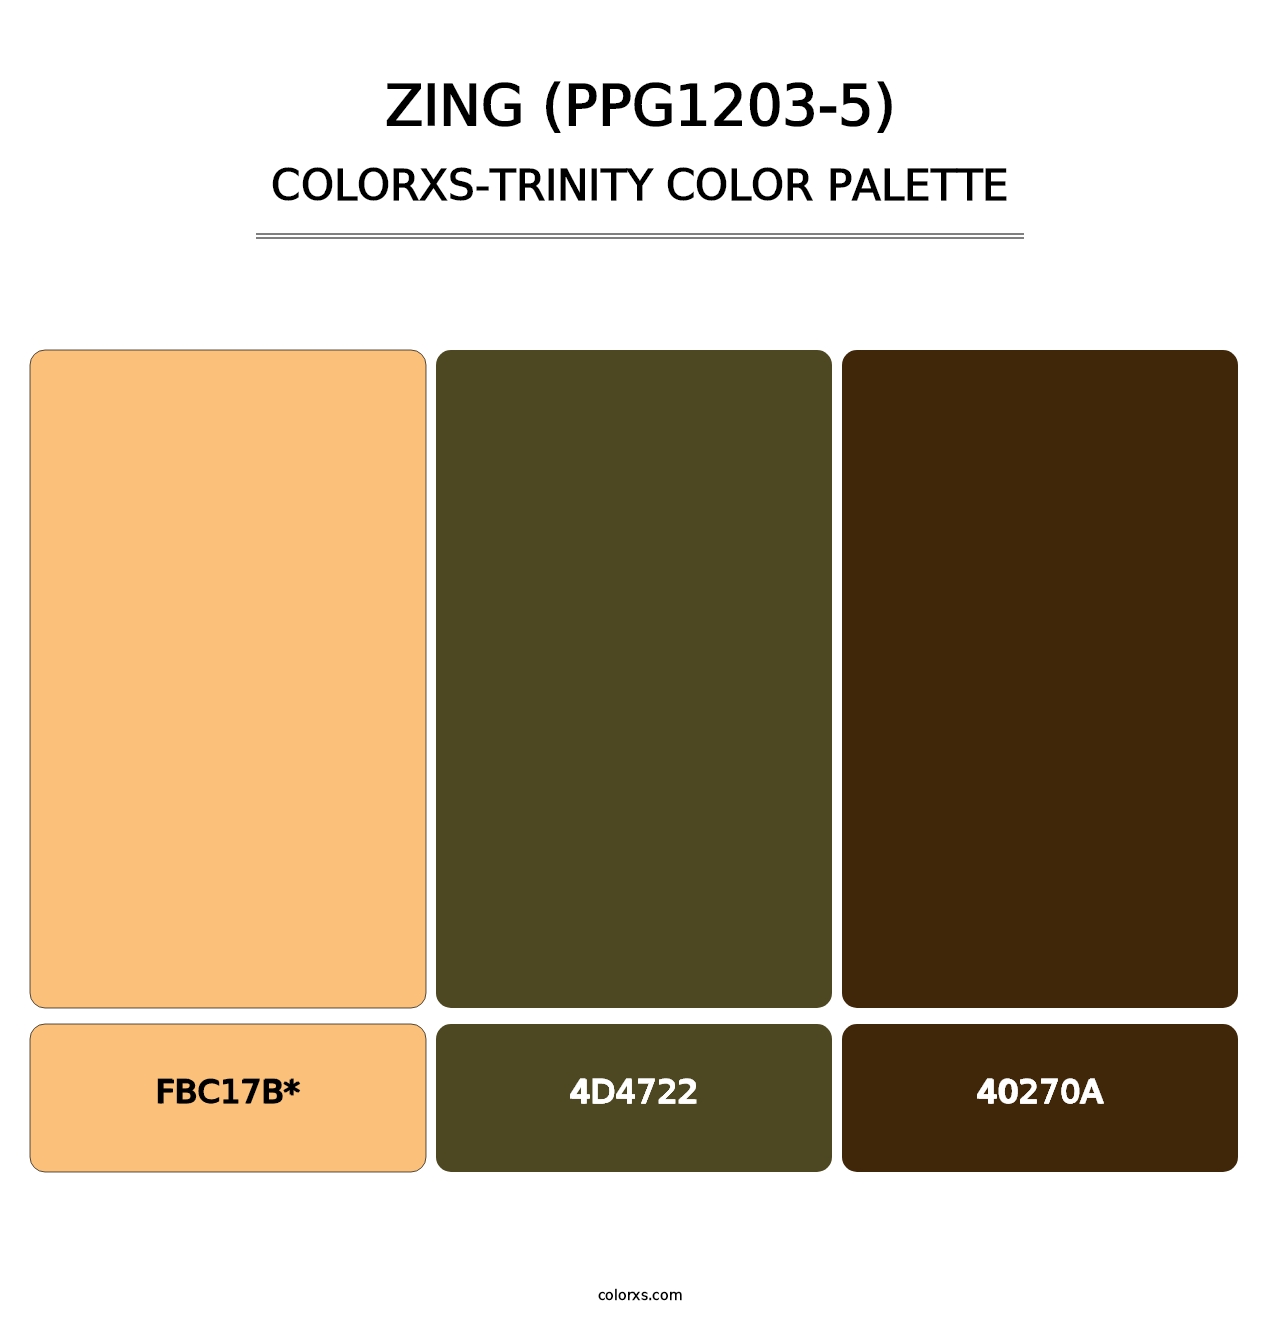 Zing (PPG1203-5) - Colorxs Trinity Palette